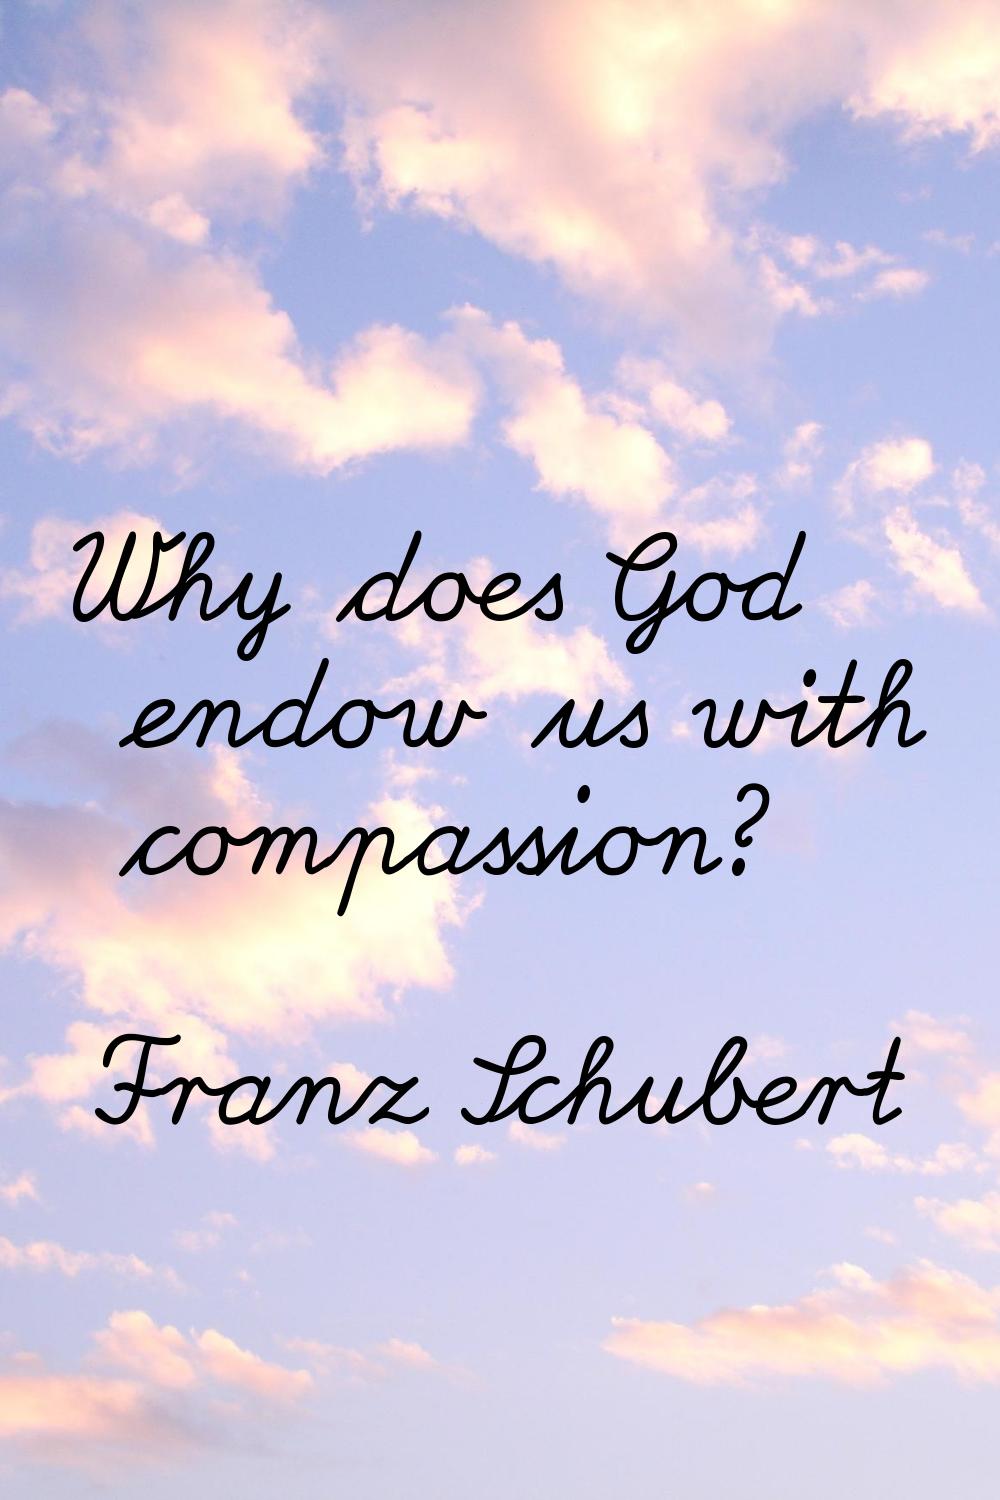 Why does God endow us with compassion?